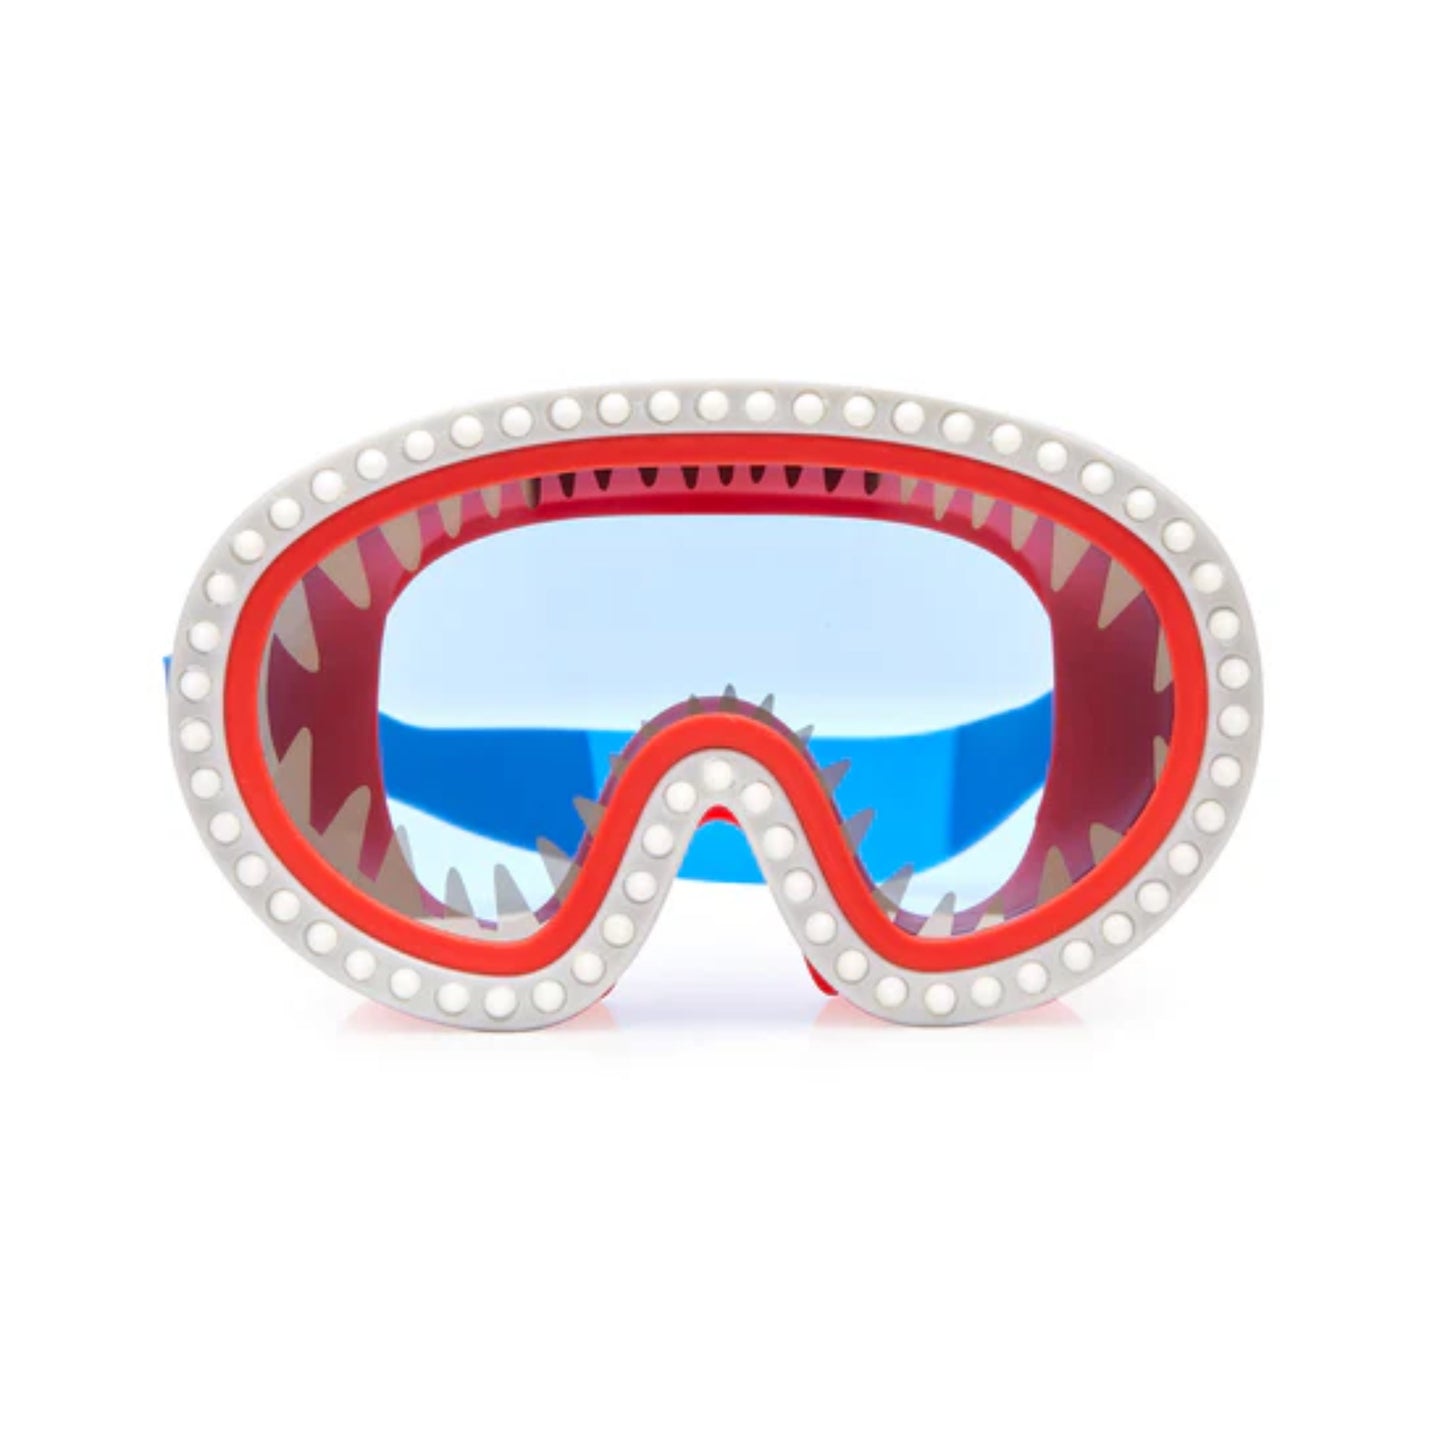 Chewy Shark Swim Mask - Tinted Blue Lens